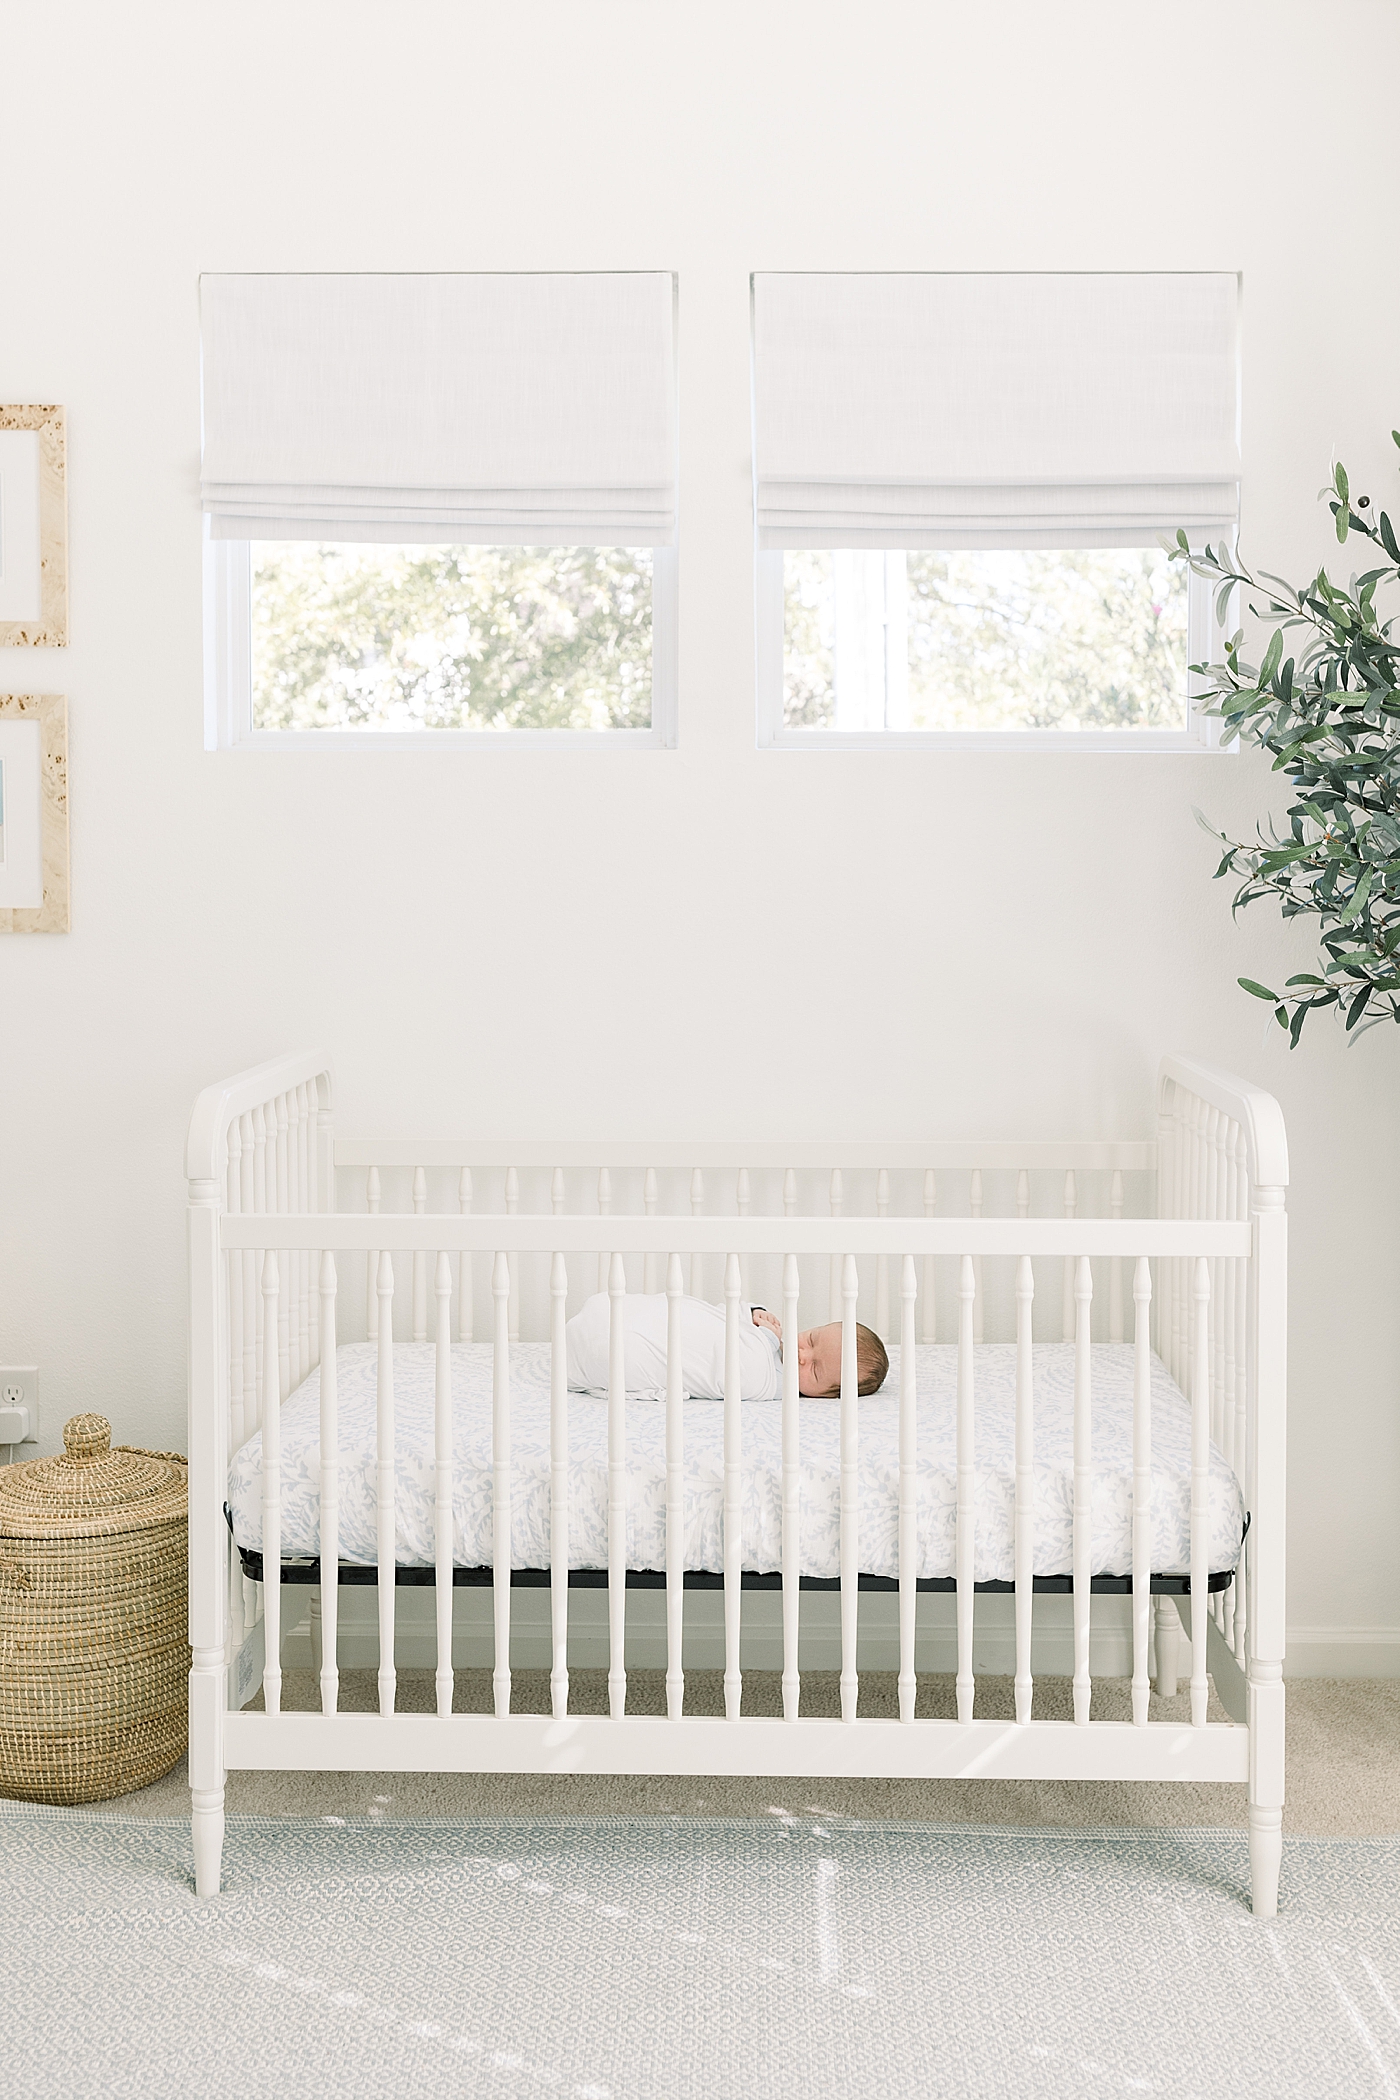 Baby swaddled in a white crib in a white room with natural light | Image by Caitlyn Motycka Photography